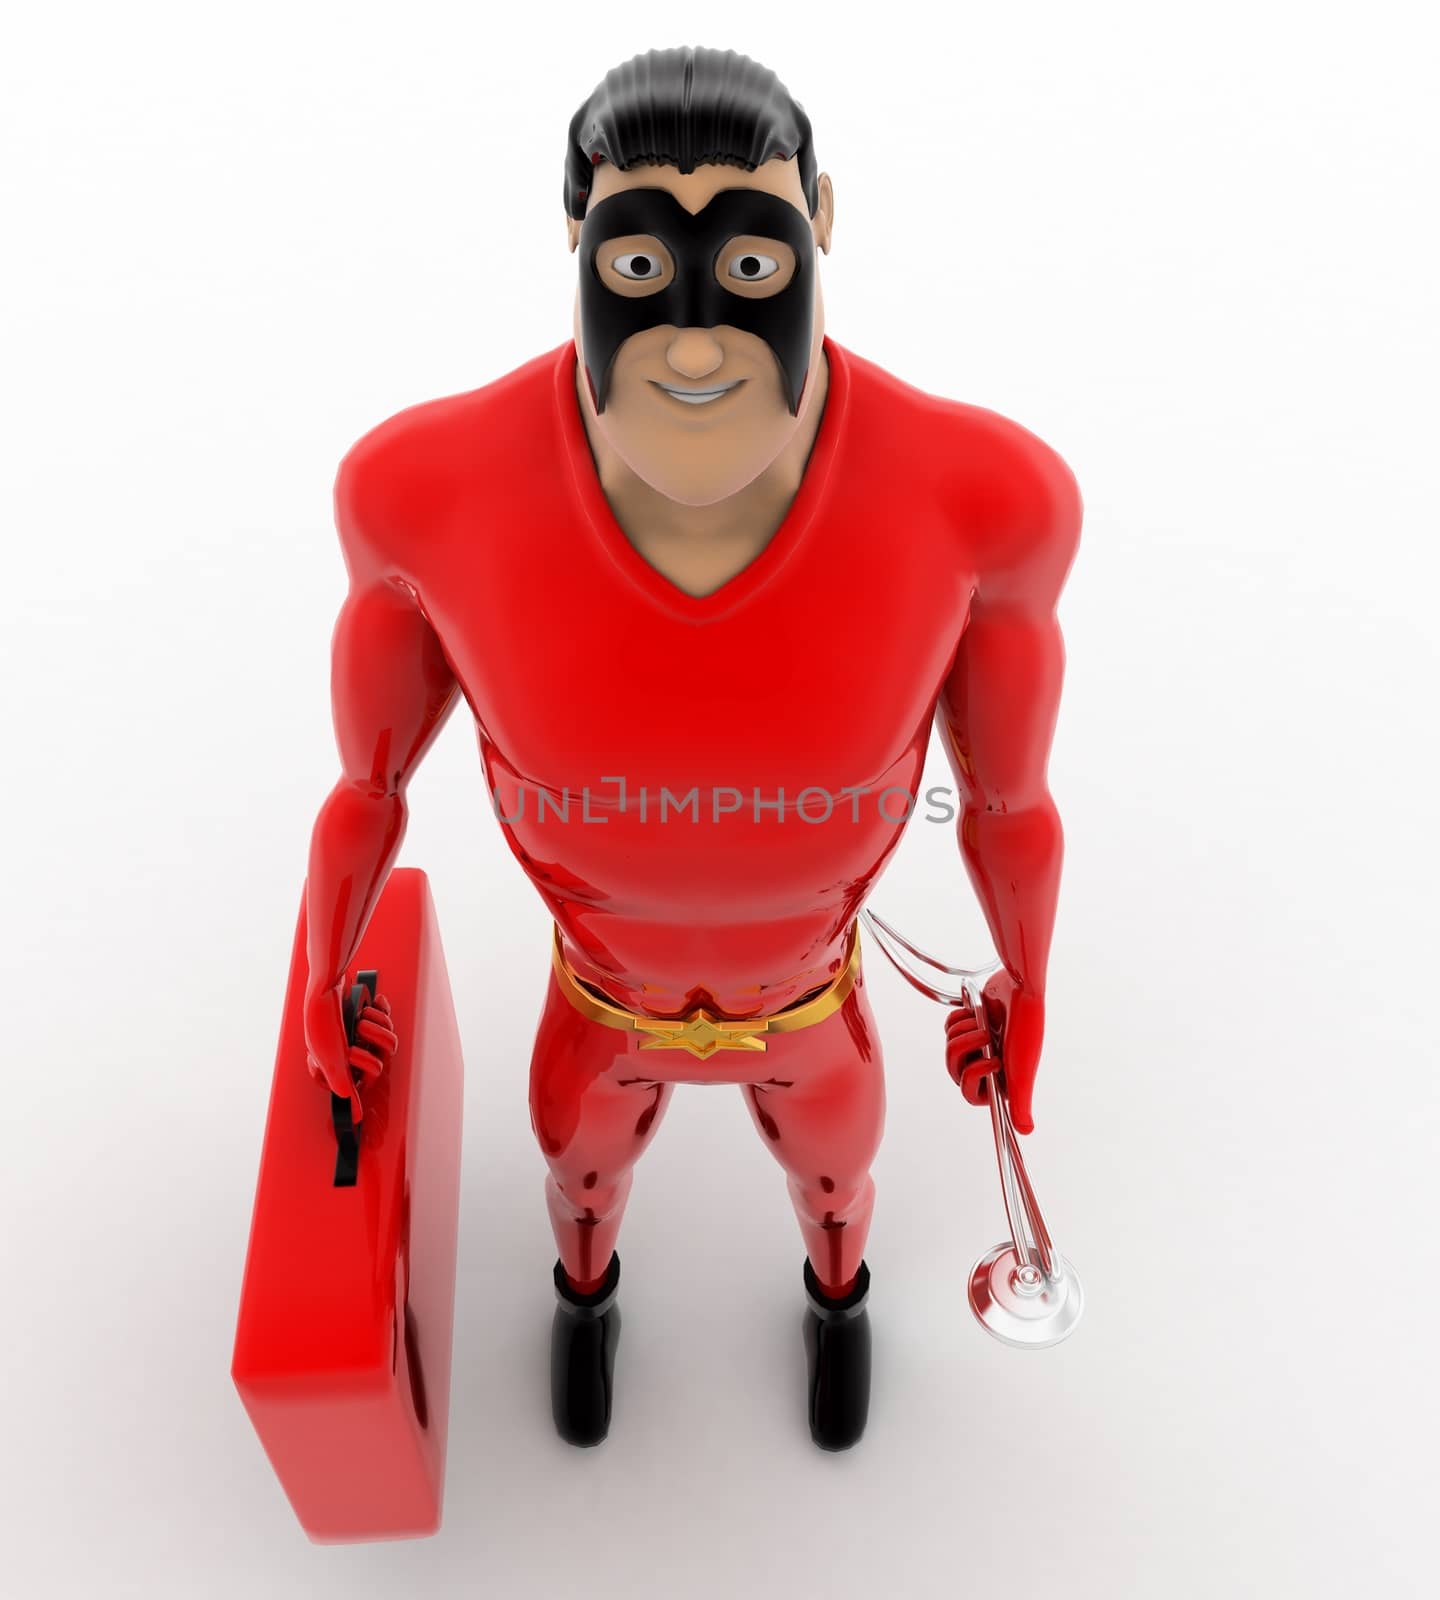 3d superhero with medical kit box and stethoscope concept by touchmenithin@gmail.com